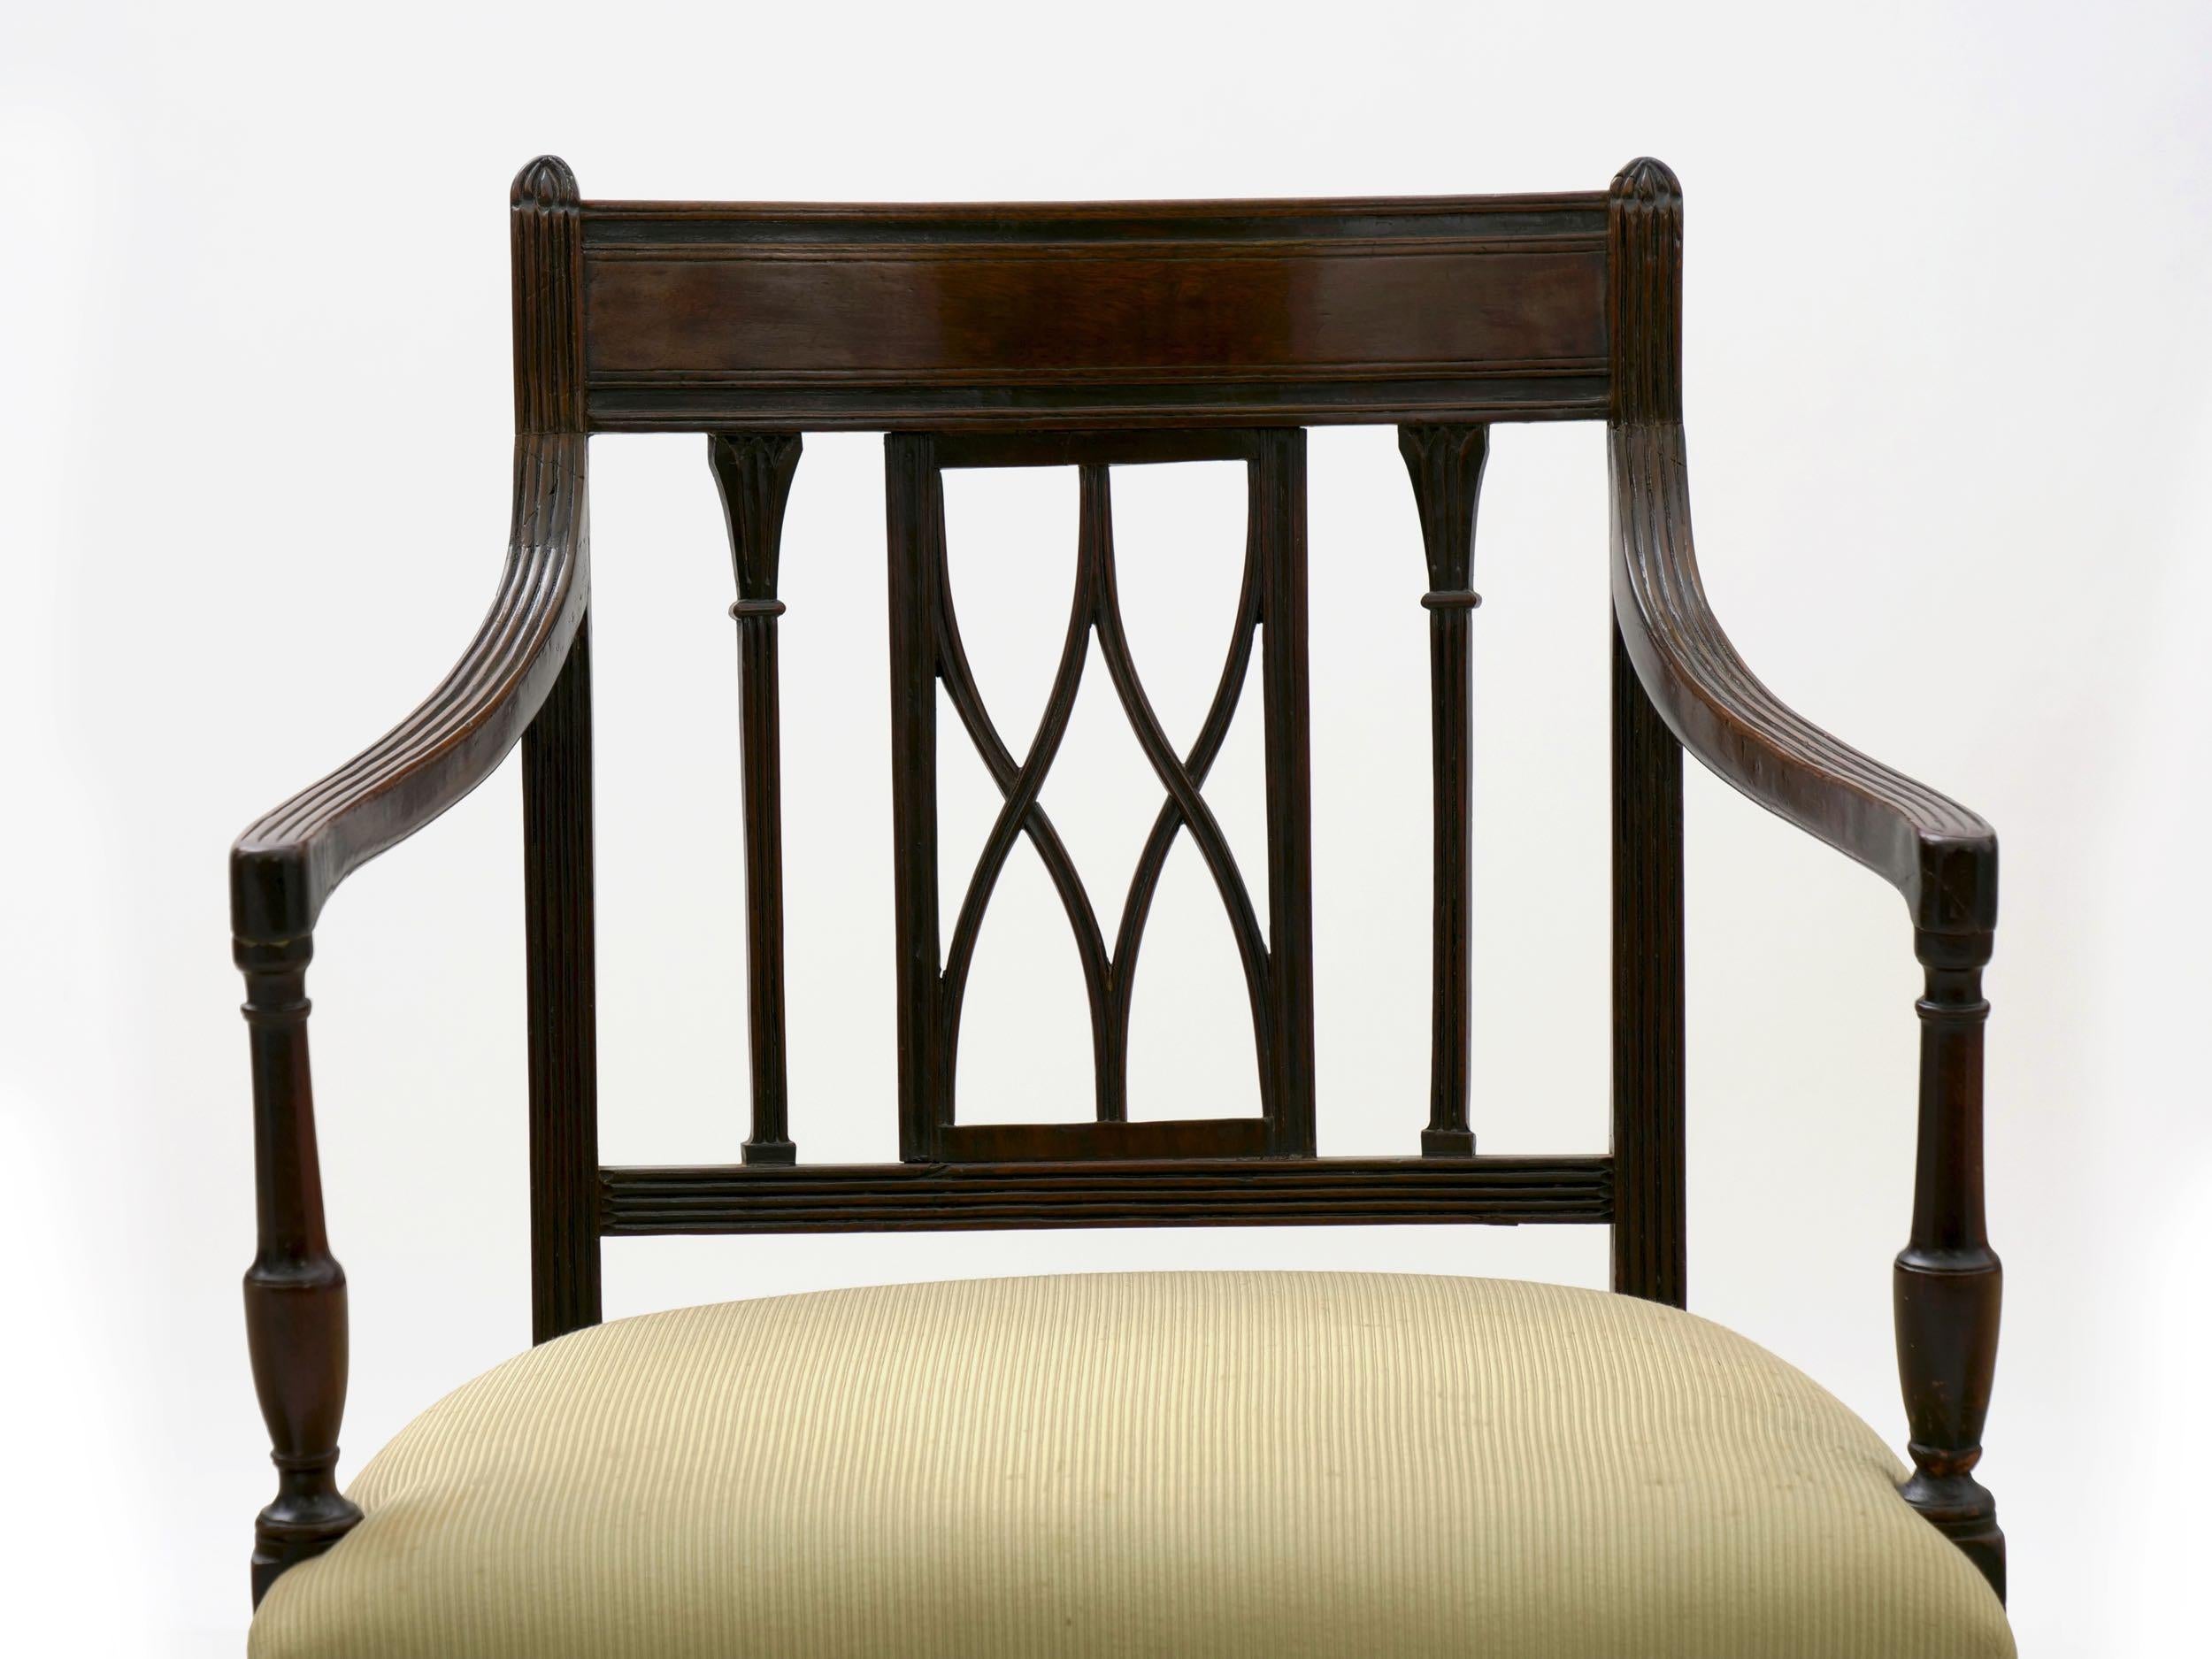 19th Century Set of Six English Regency Carved Mahogany Antique Dining Chairs, circa 1800